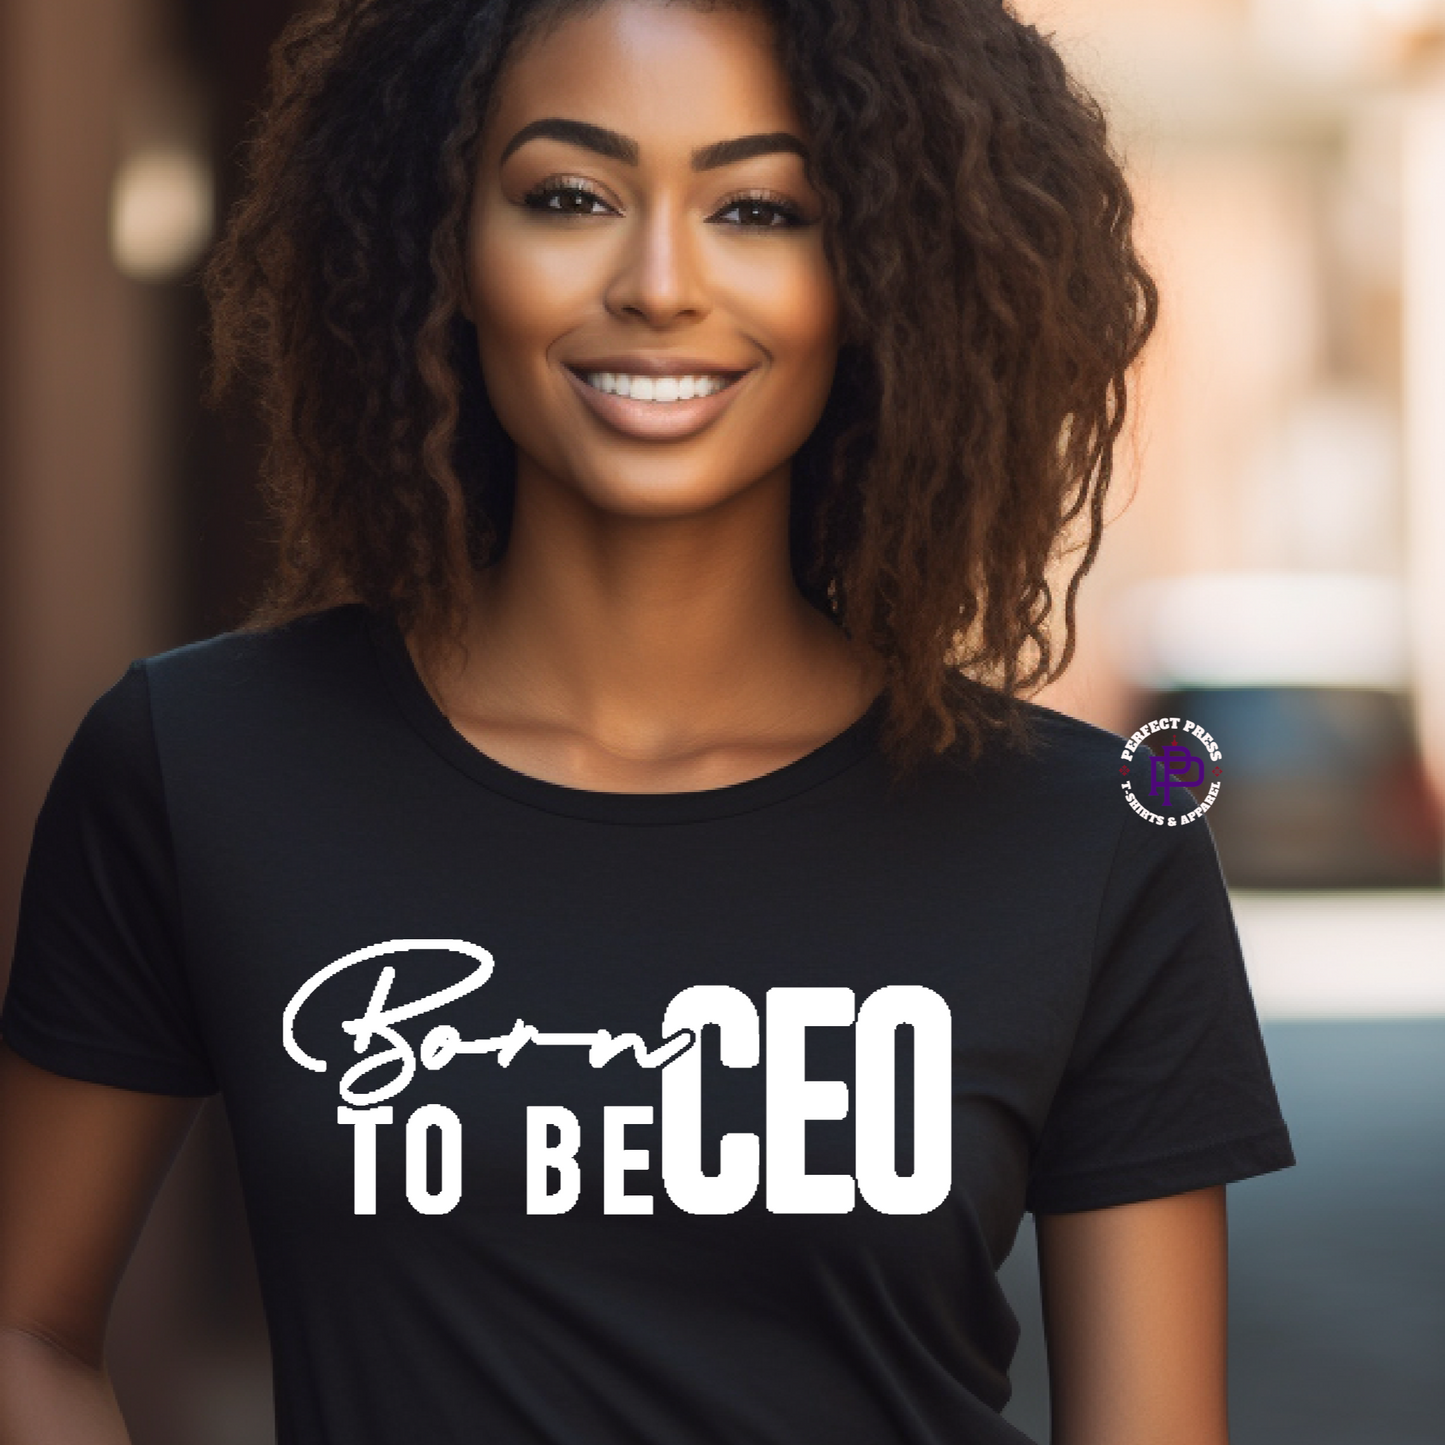 BORN TO BE CEO...